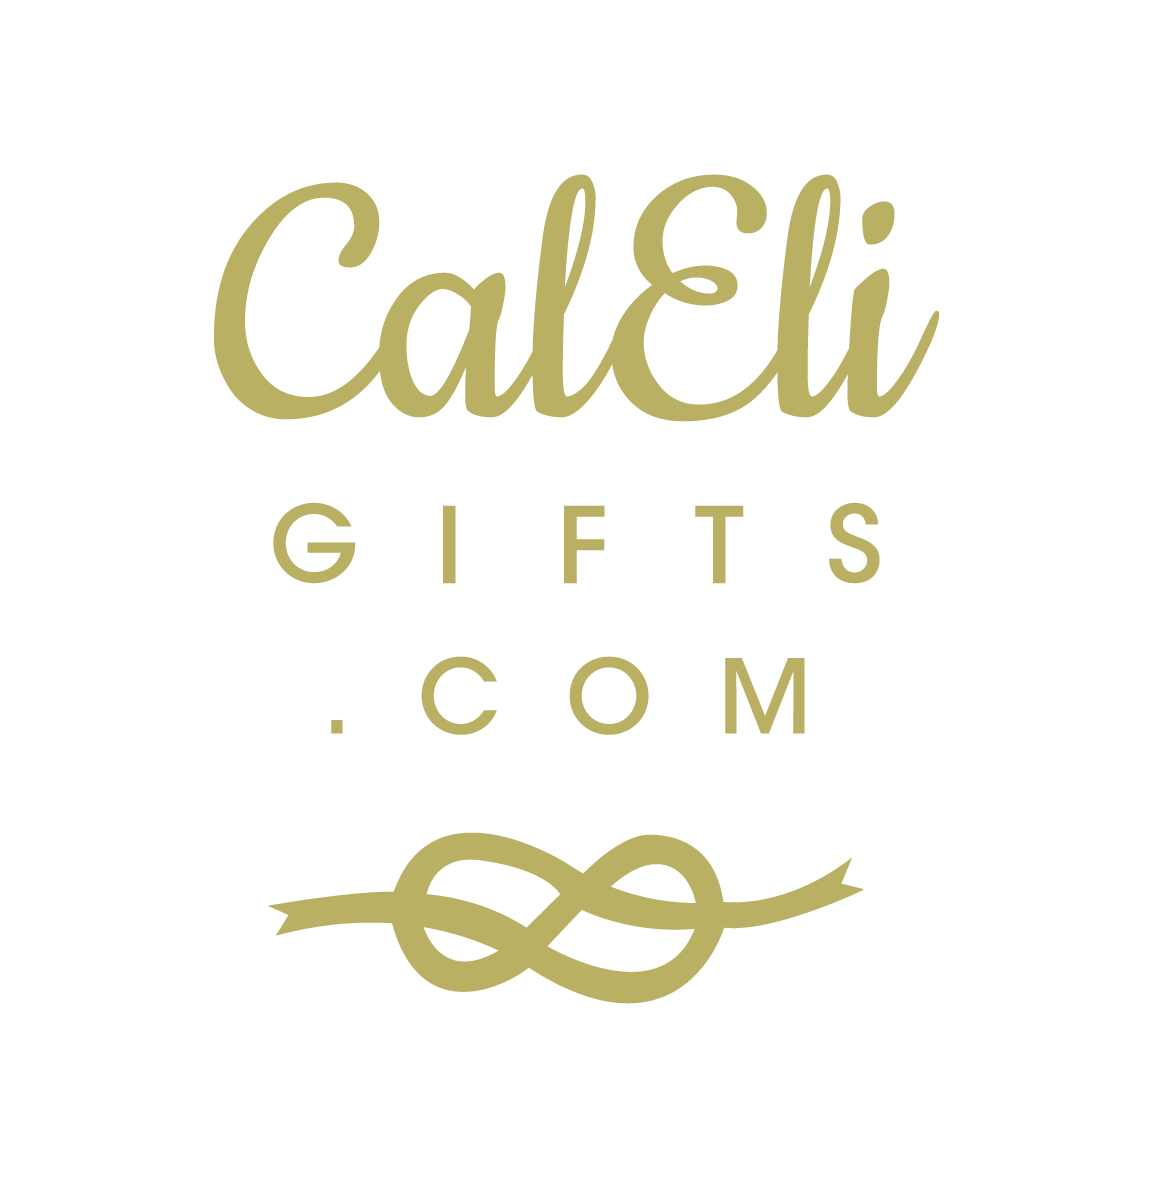 CalEli Gifts is 7 years old!